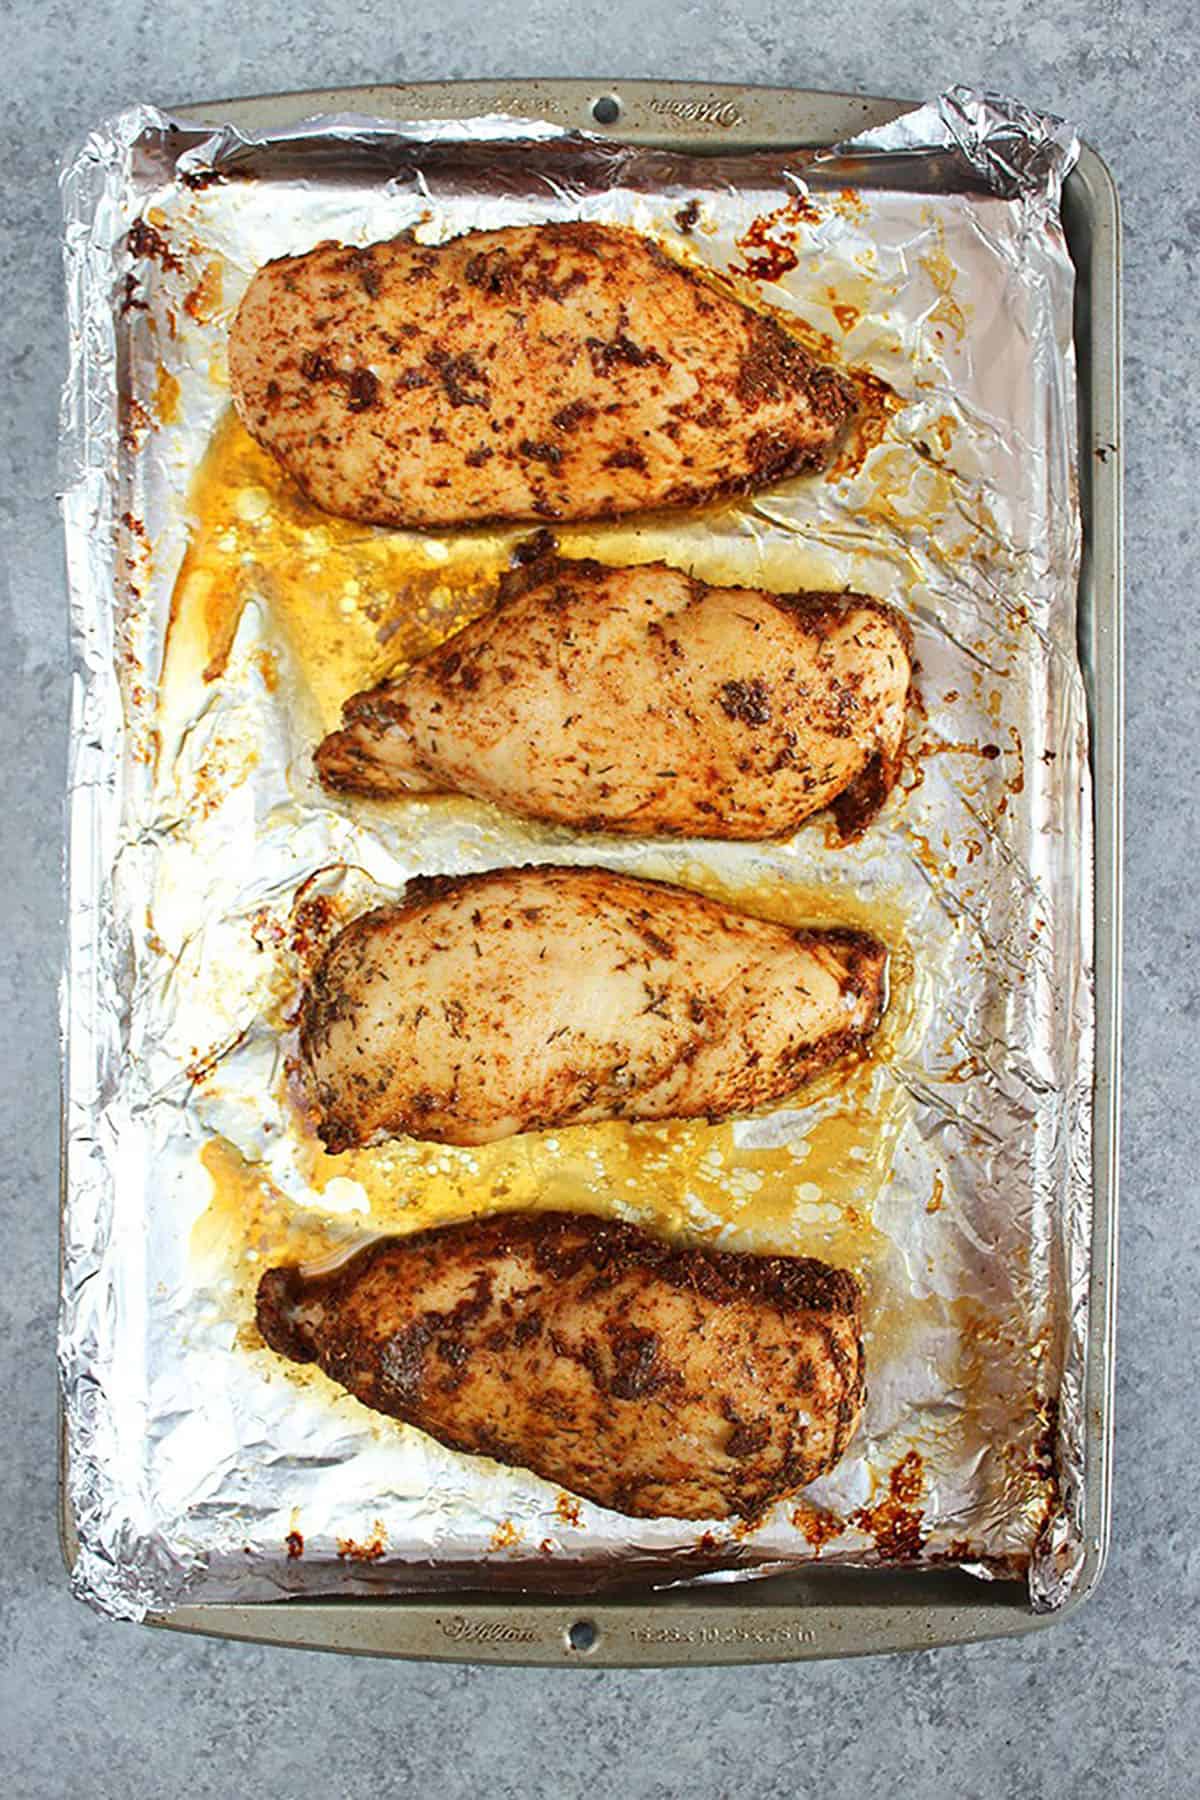 four baked chicken breasts on a baking sheet